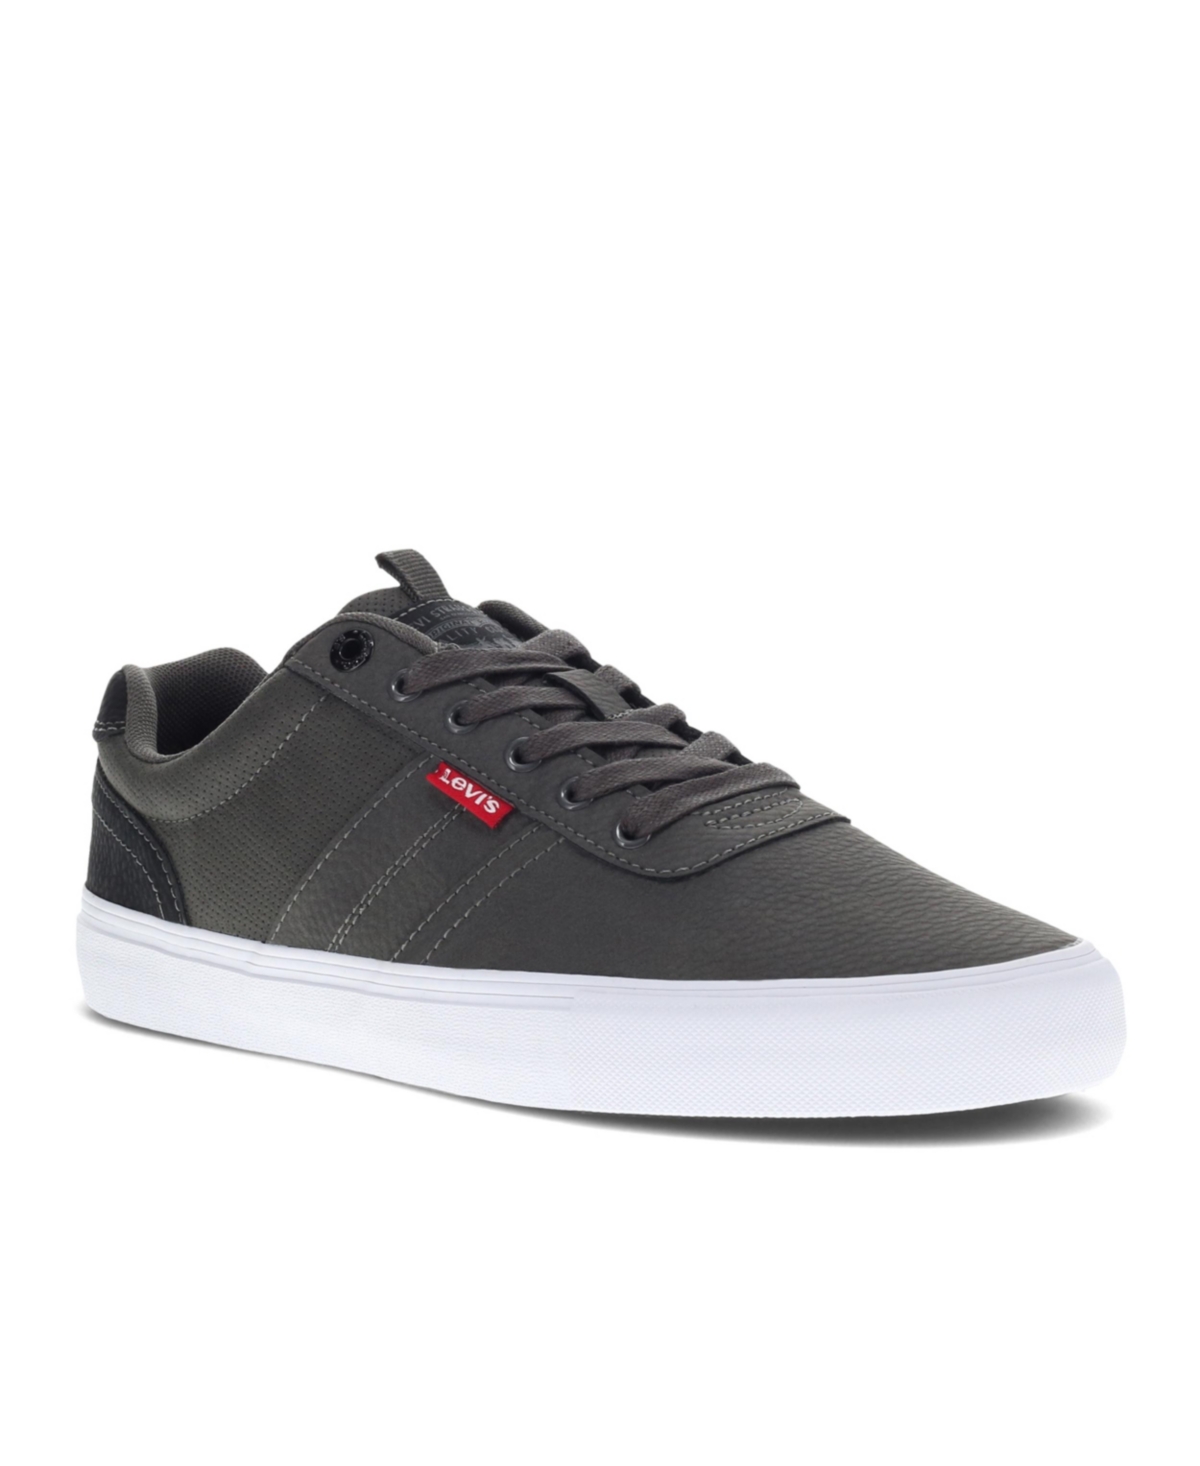 Levi's Men's Miles Wx Stacked Sneakers Men's Shoes In Charcoal/black